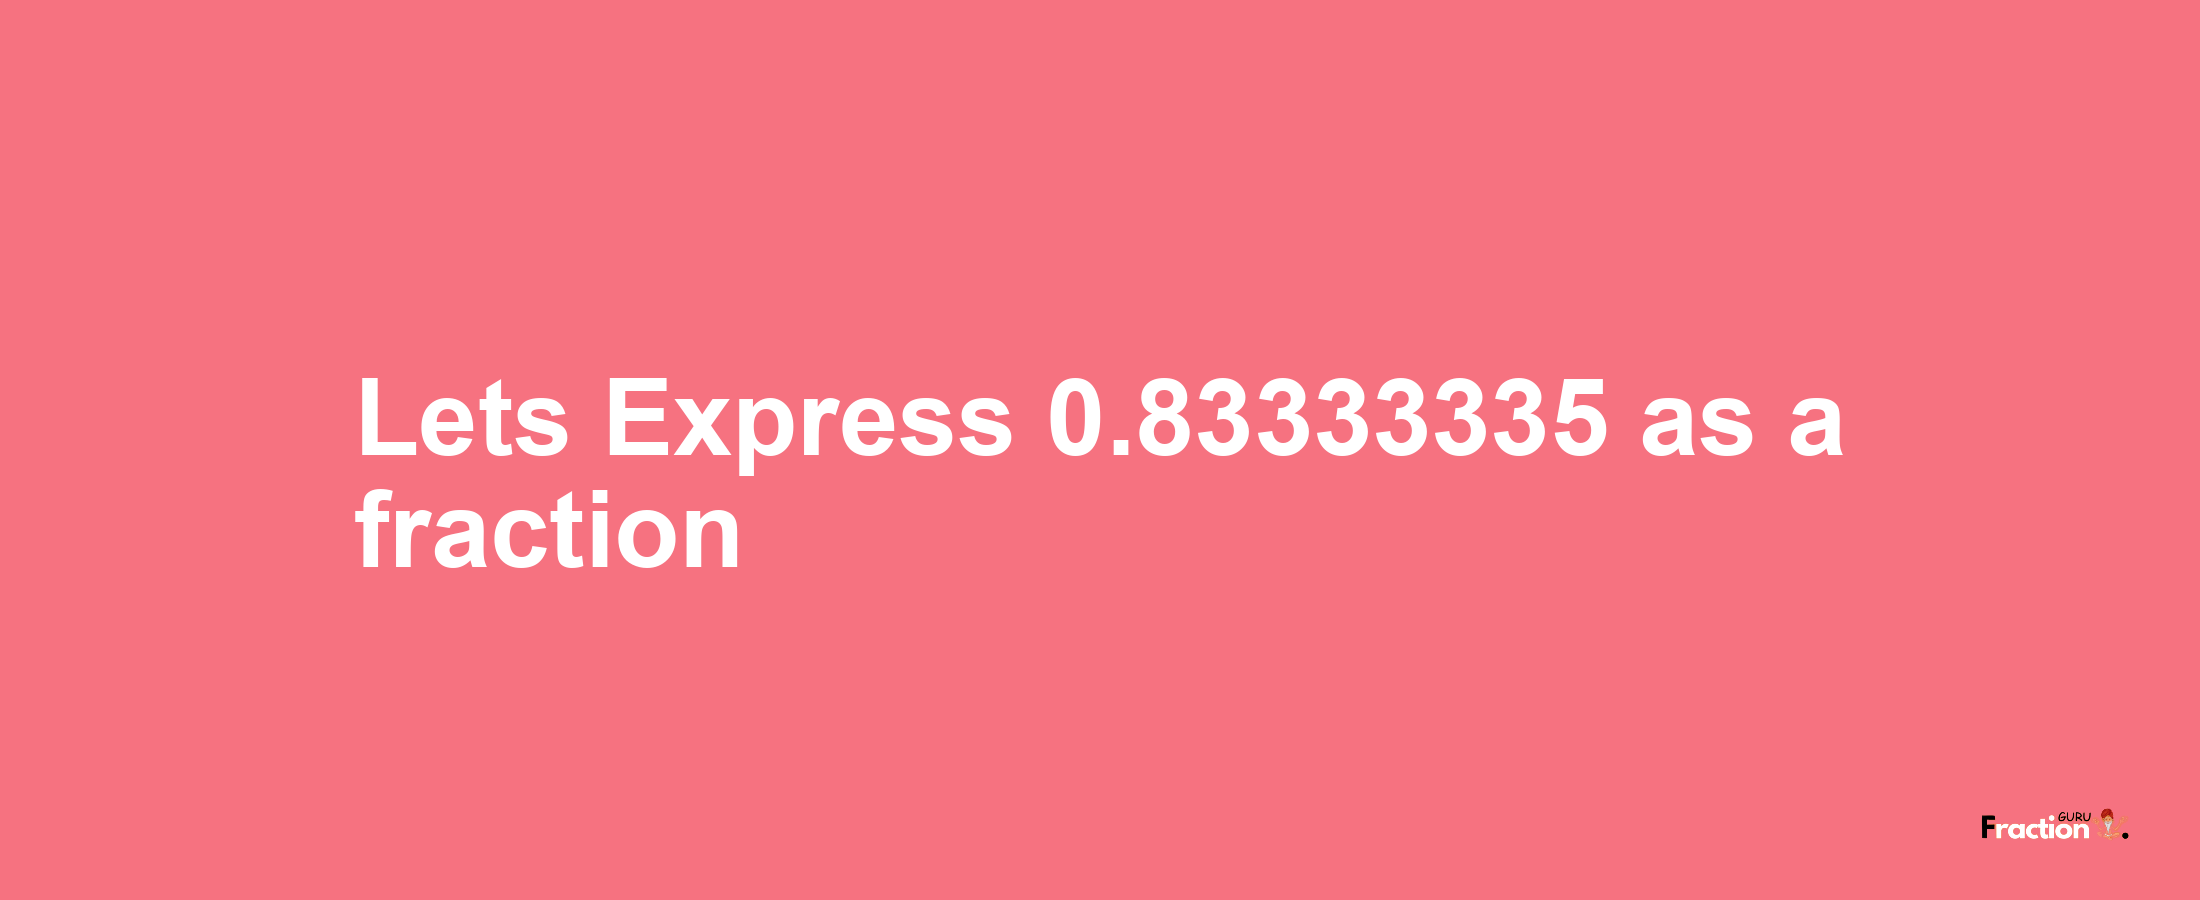 Lets Express 0.83333335 as afraction